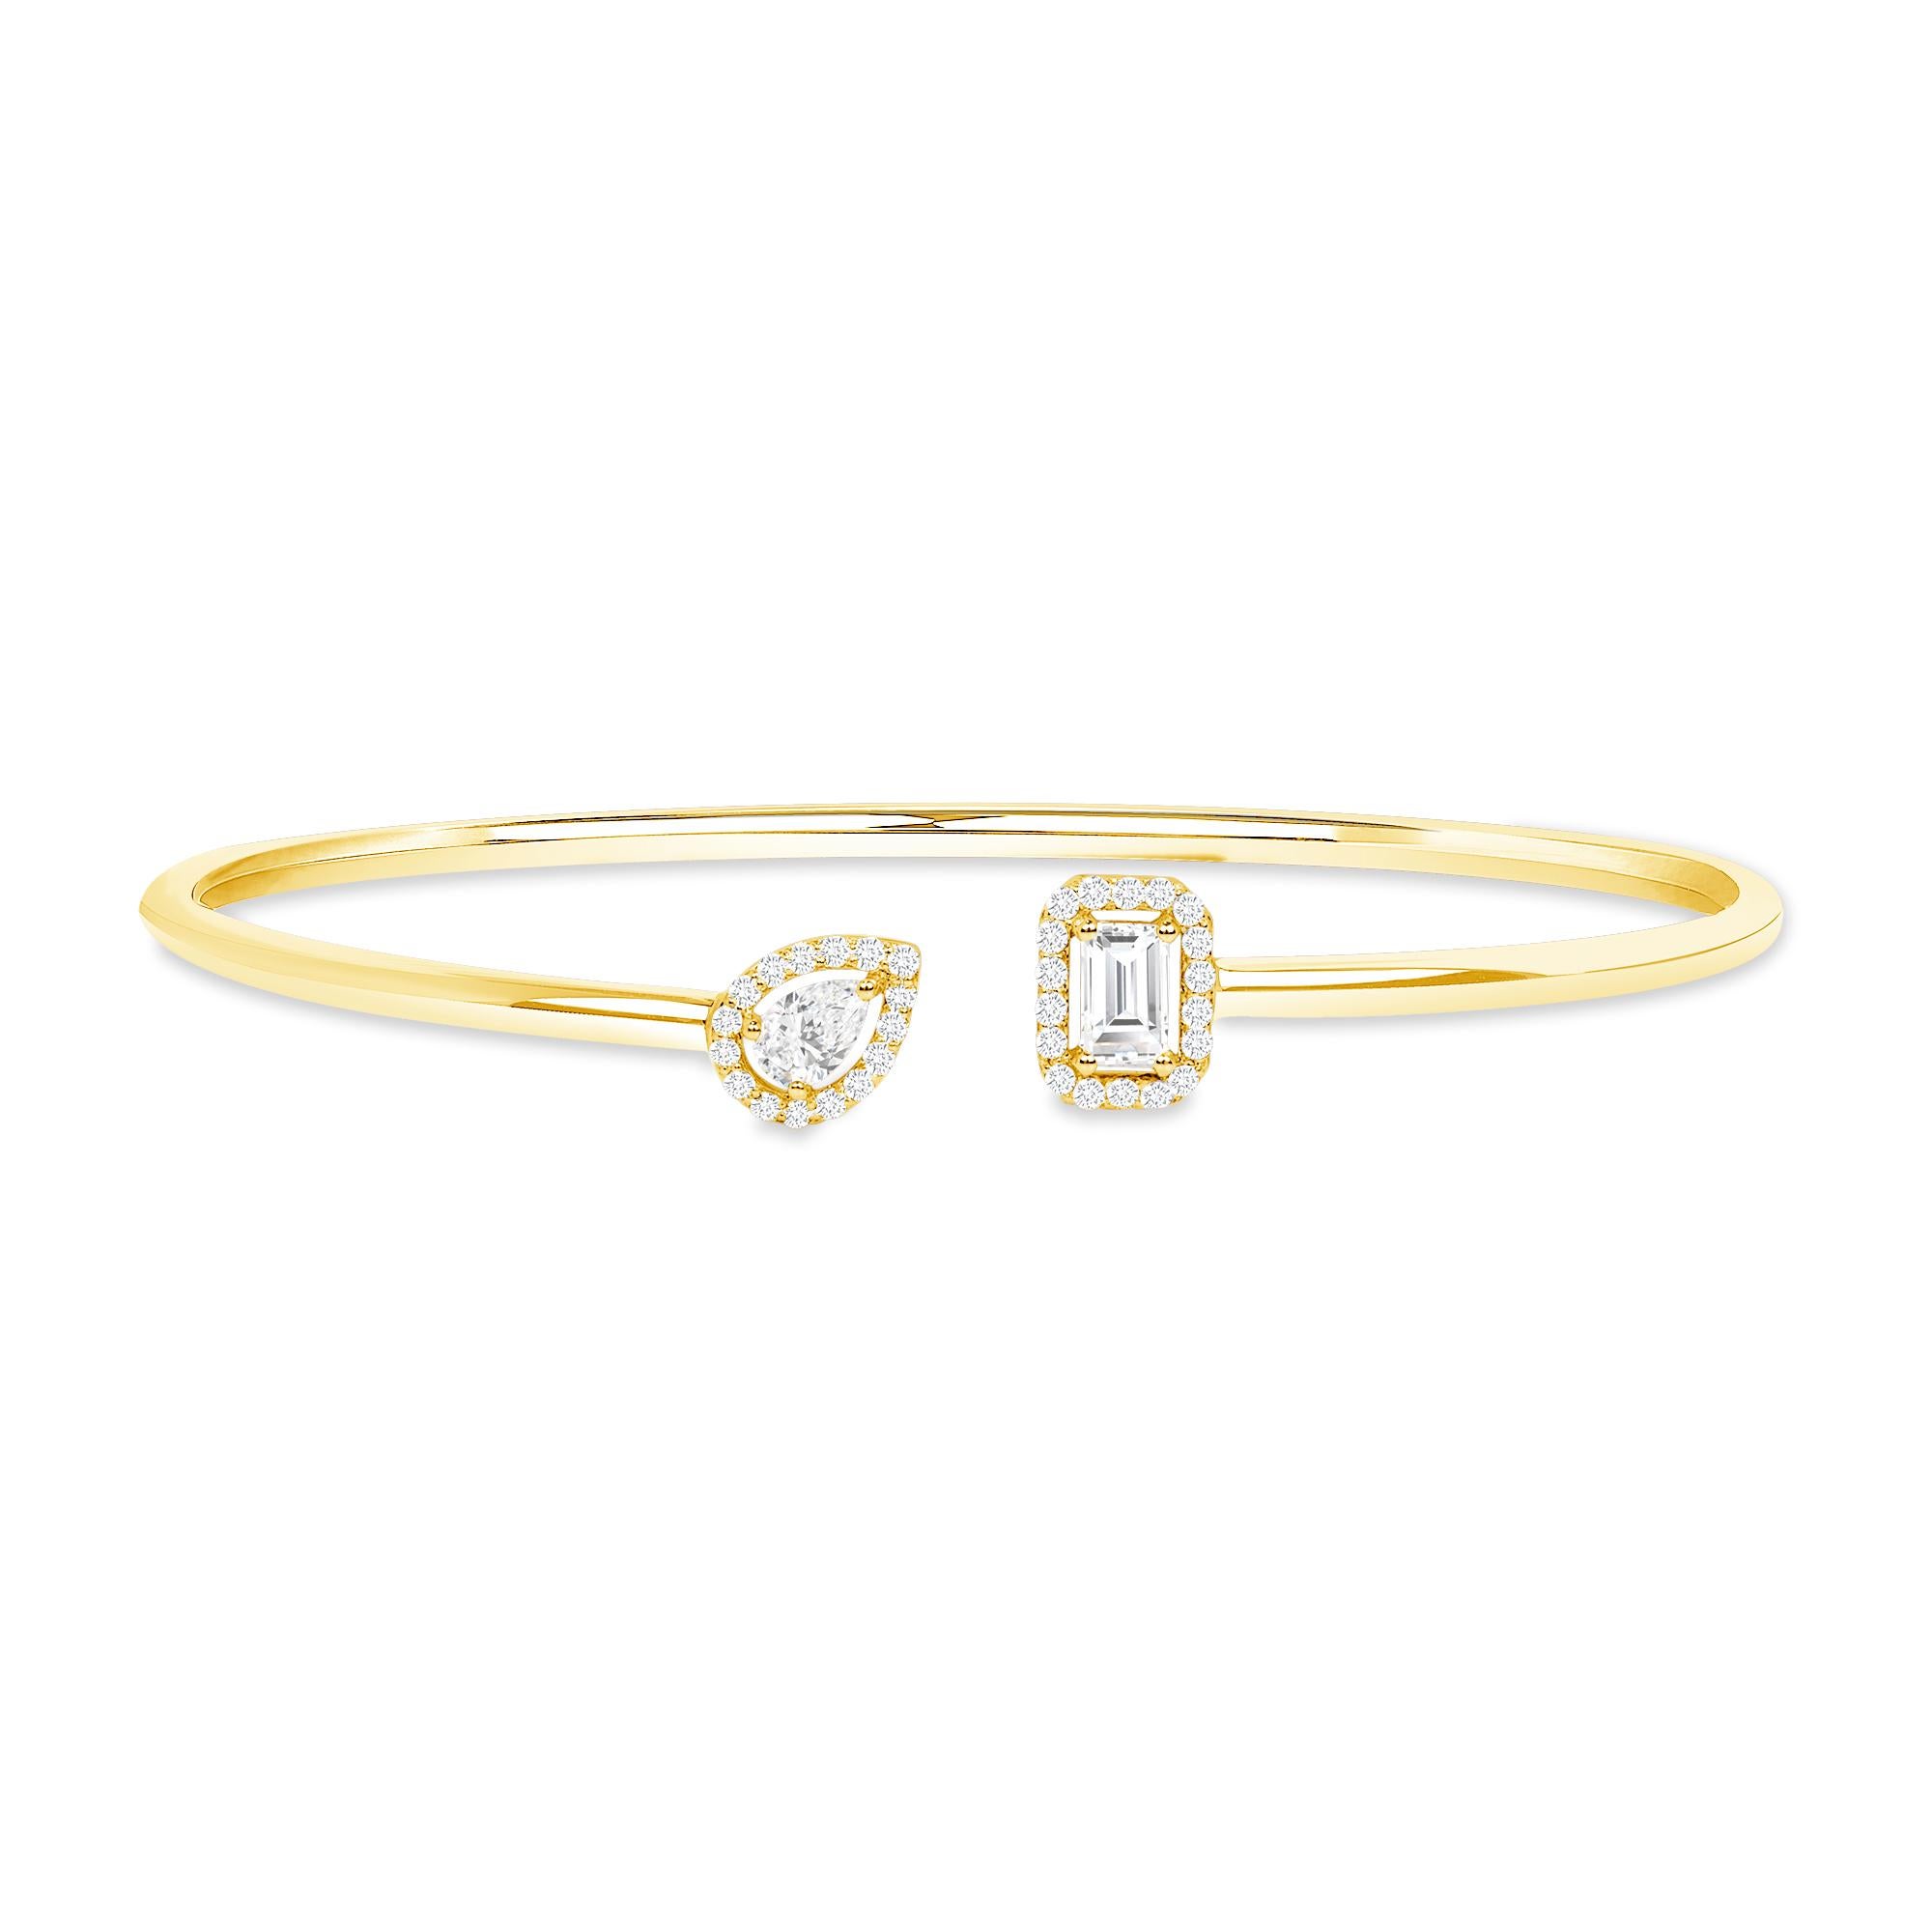 18k Gold Pear and Emerald Diamond Toi et Moi Flexible Cuff Bangle

Elegant 18K gold diamond bracelet highlights two cut styles: the pear cut and the emerald cut, joined by a dazzling entourage of round brilliant-cut diamonds. This bracelet provide